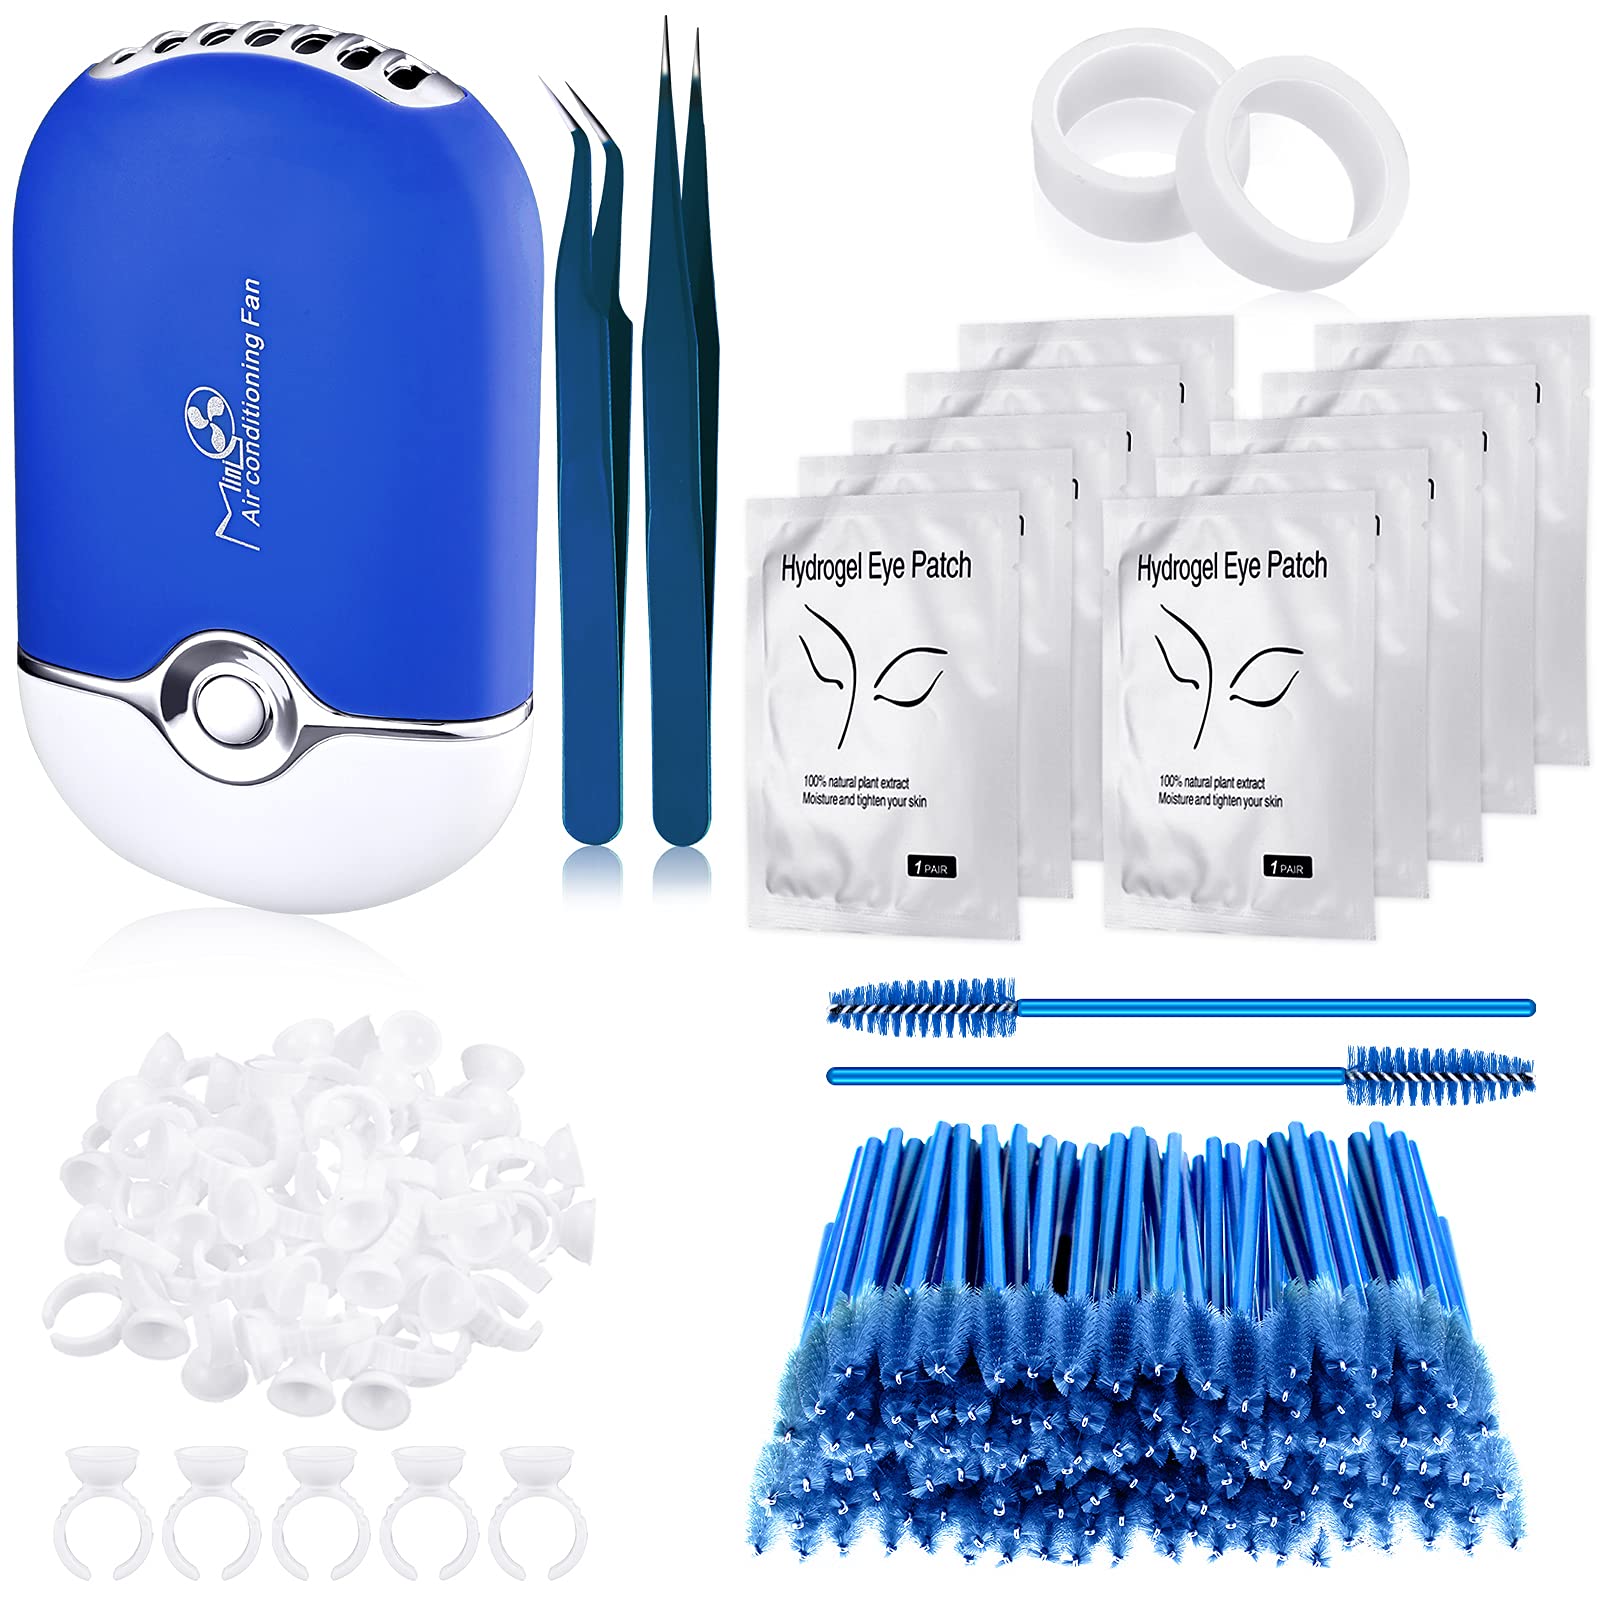 Honoson Eyelash Extension Supplies, USB Air Conditioning Blower, 2 Straight  and Curved Tweezers,100 Disposable Mascara, 50 Glue Ring Holder, 2 Tapes